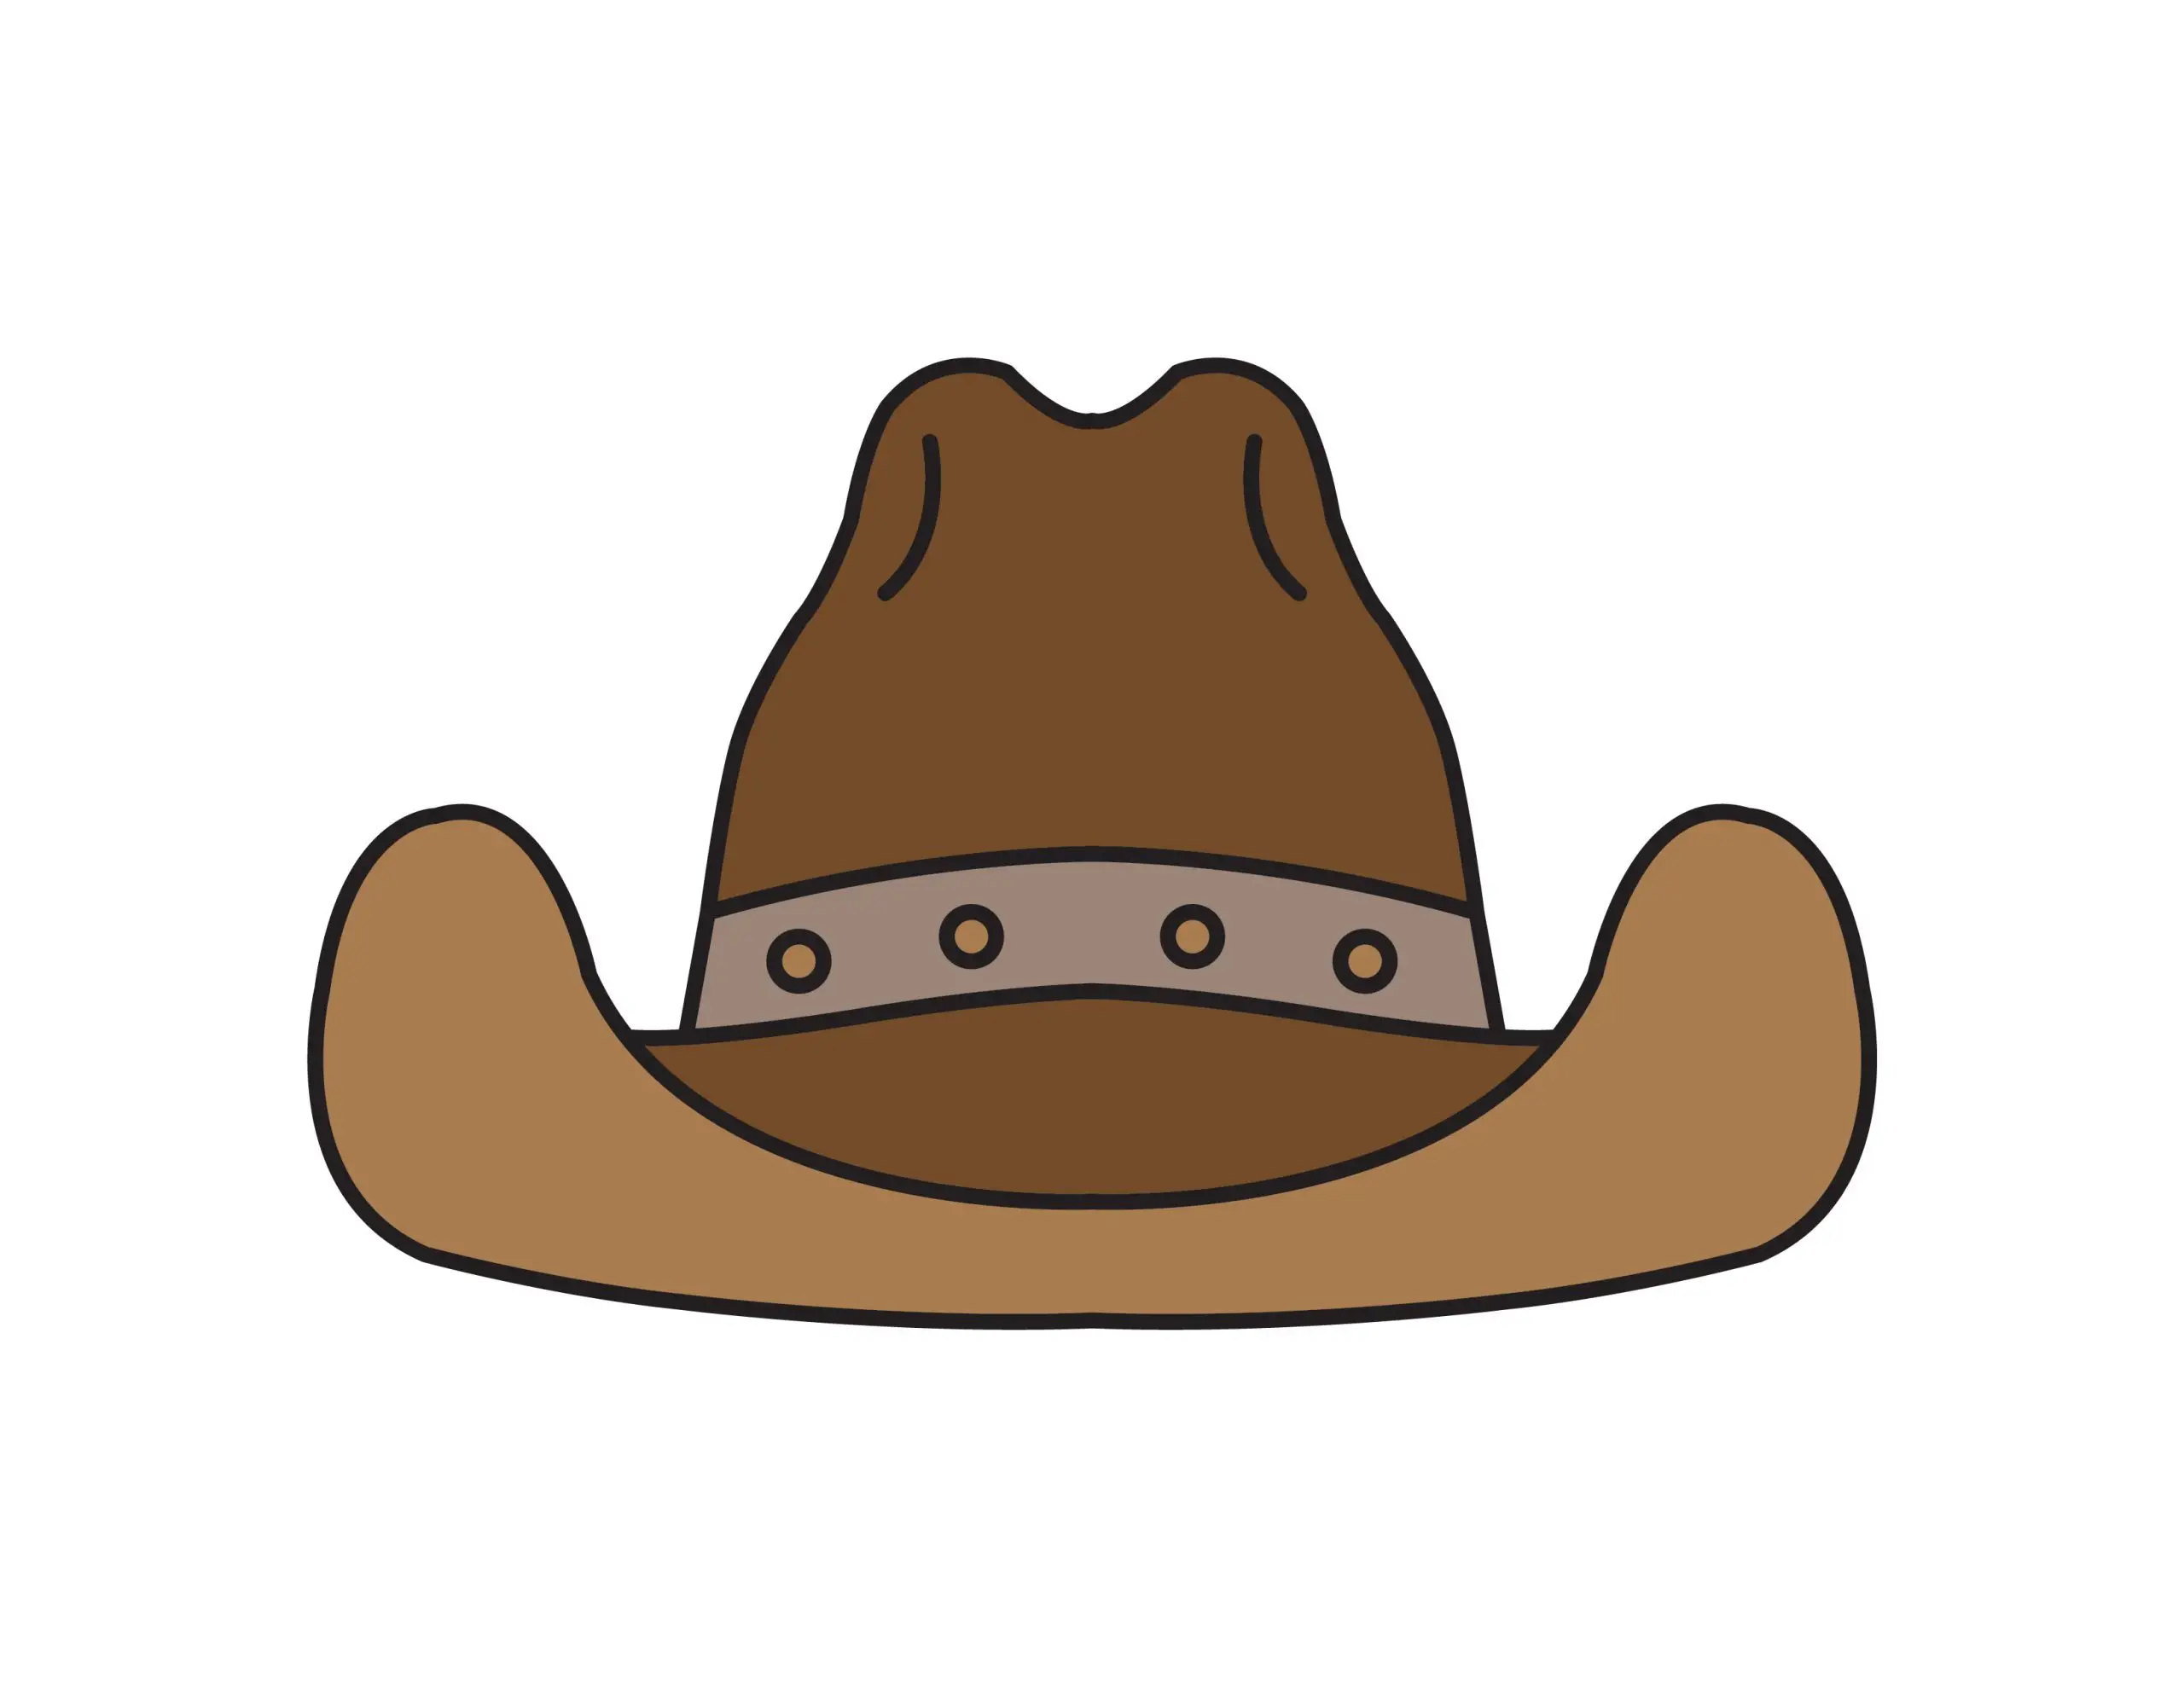 How To Draw a Gallon Cowboy Hat (Simple Steps Cartoon Tutorial for Kids)